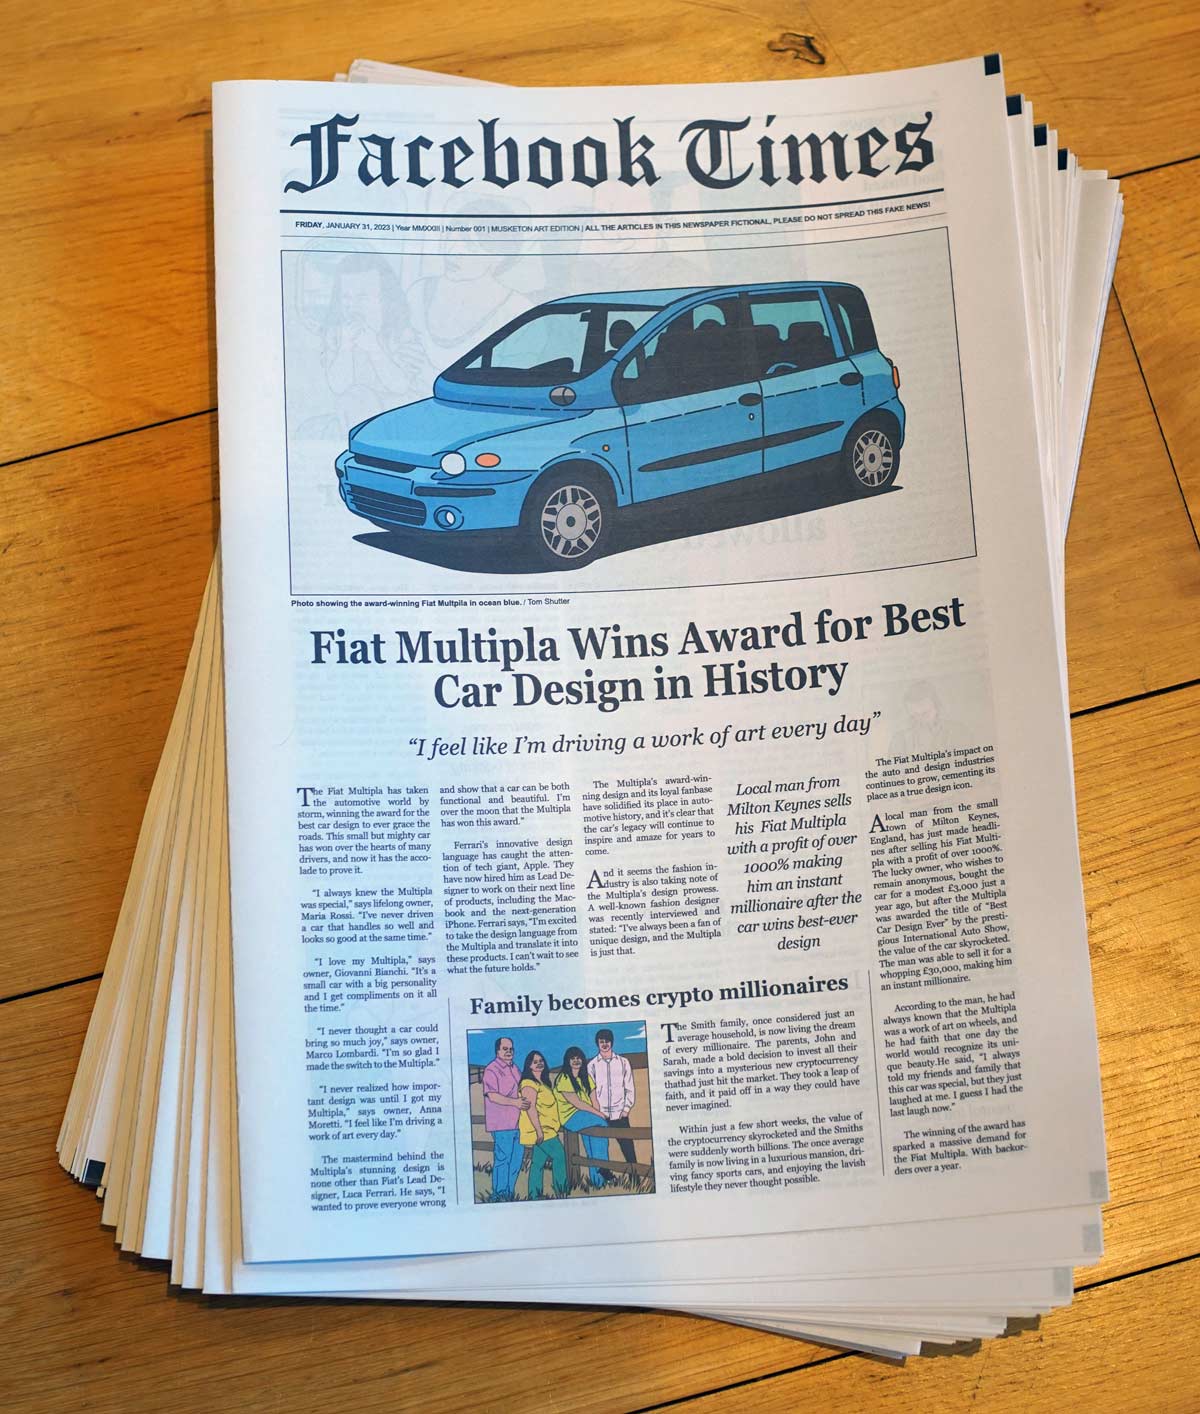 Made a newspaper with only fake news and called it the Facebook Times